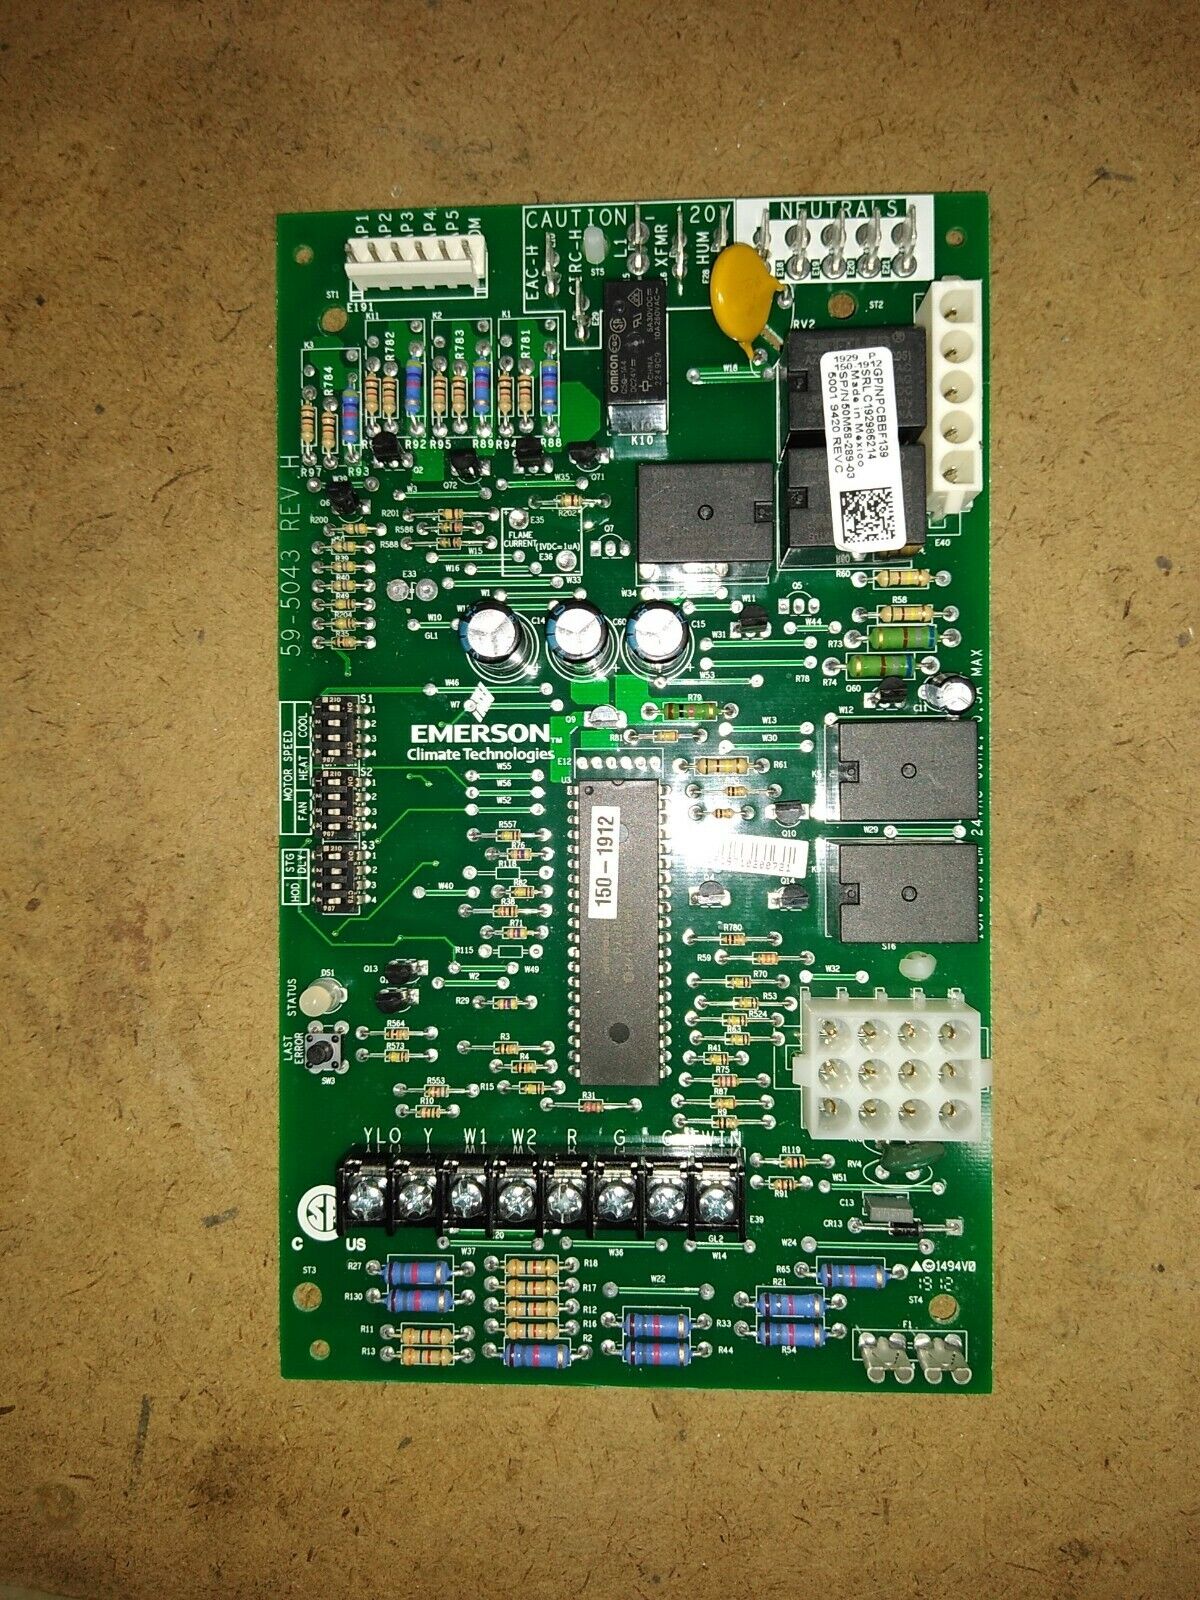 EMERSON 59-5043 REV H Ignition System Circuit Control Board